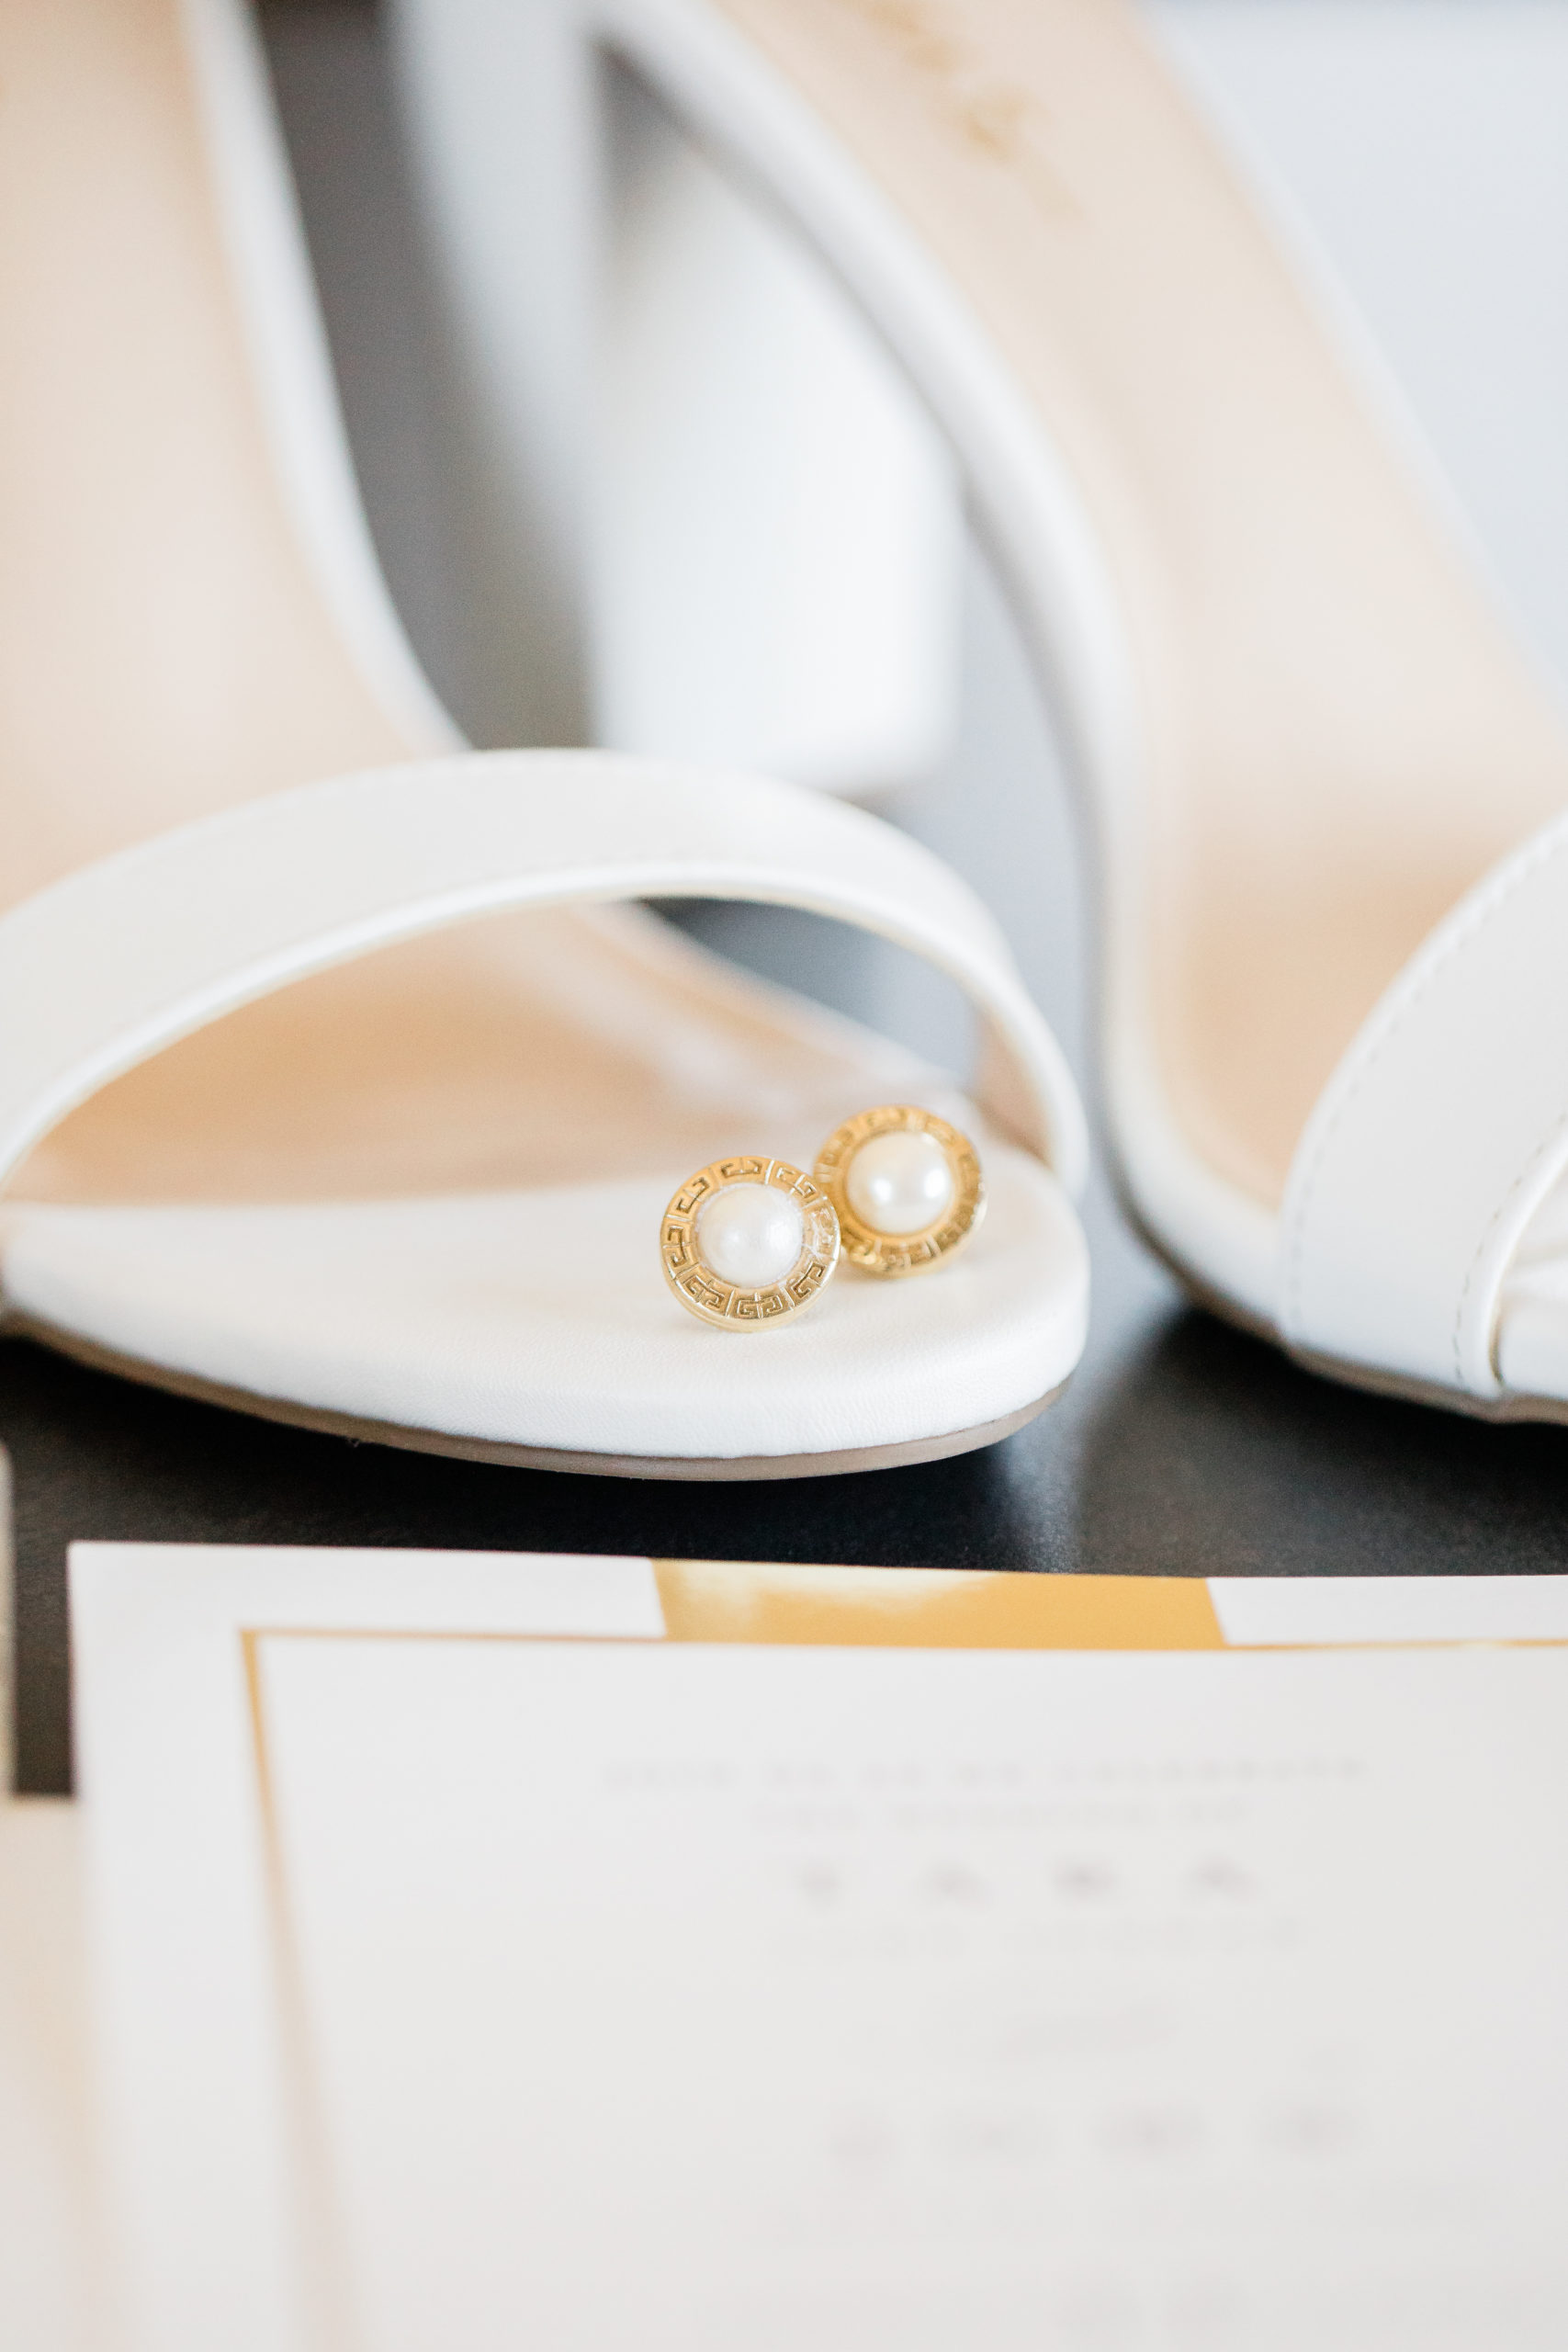 A pair of gold and pearl earrings placed on the toe of a white high heeled shoe.